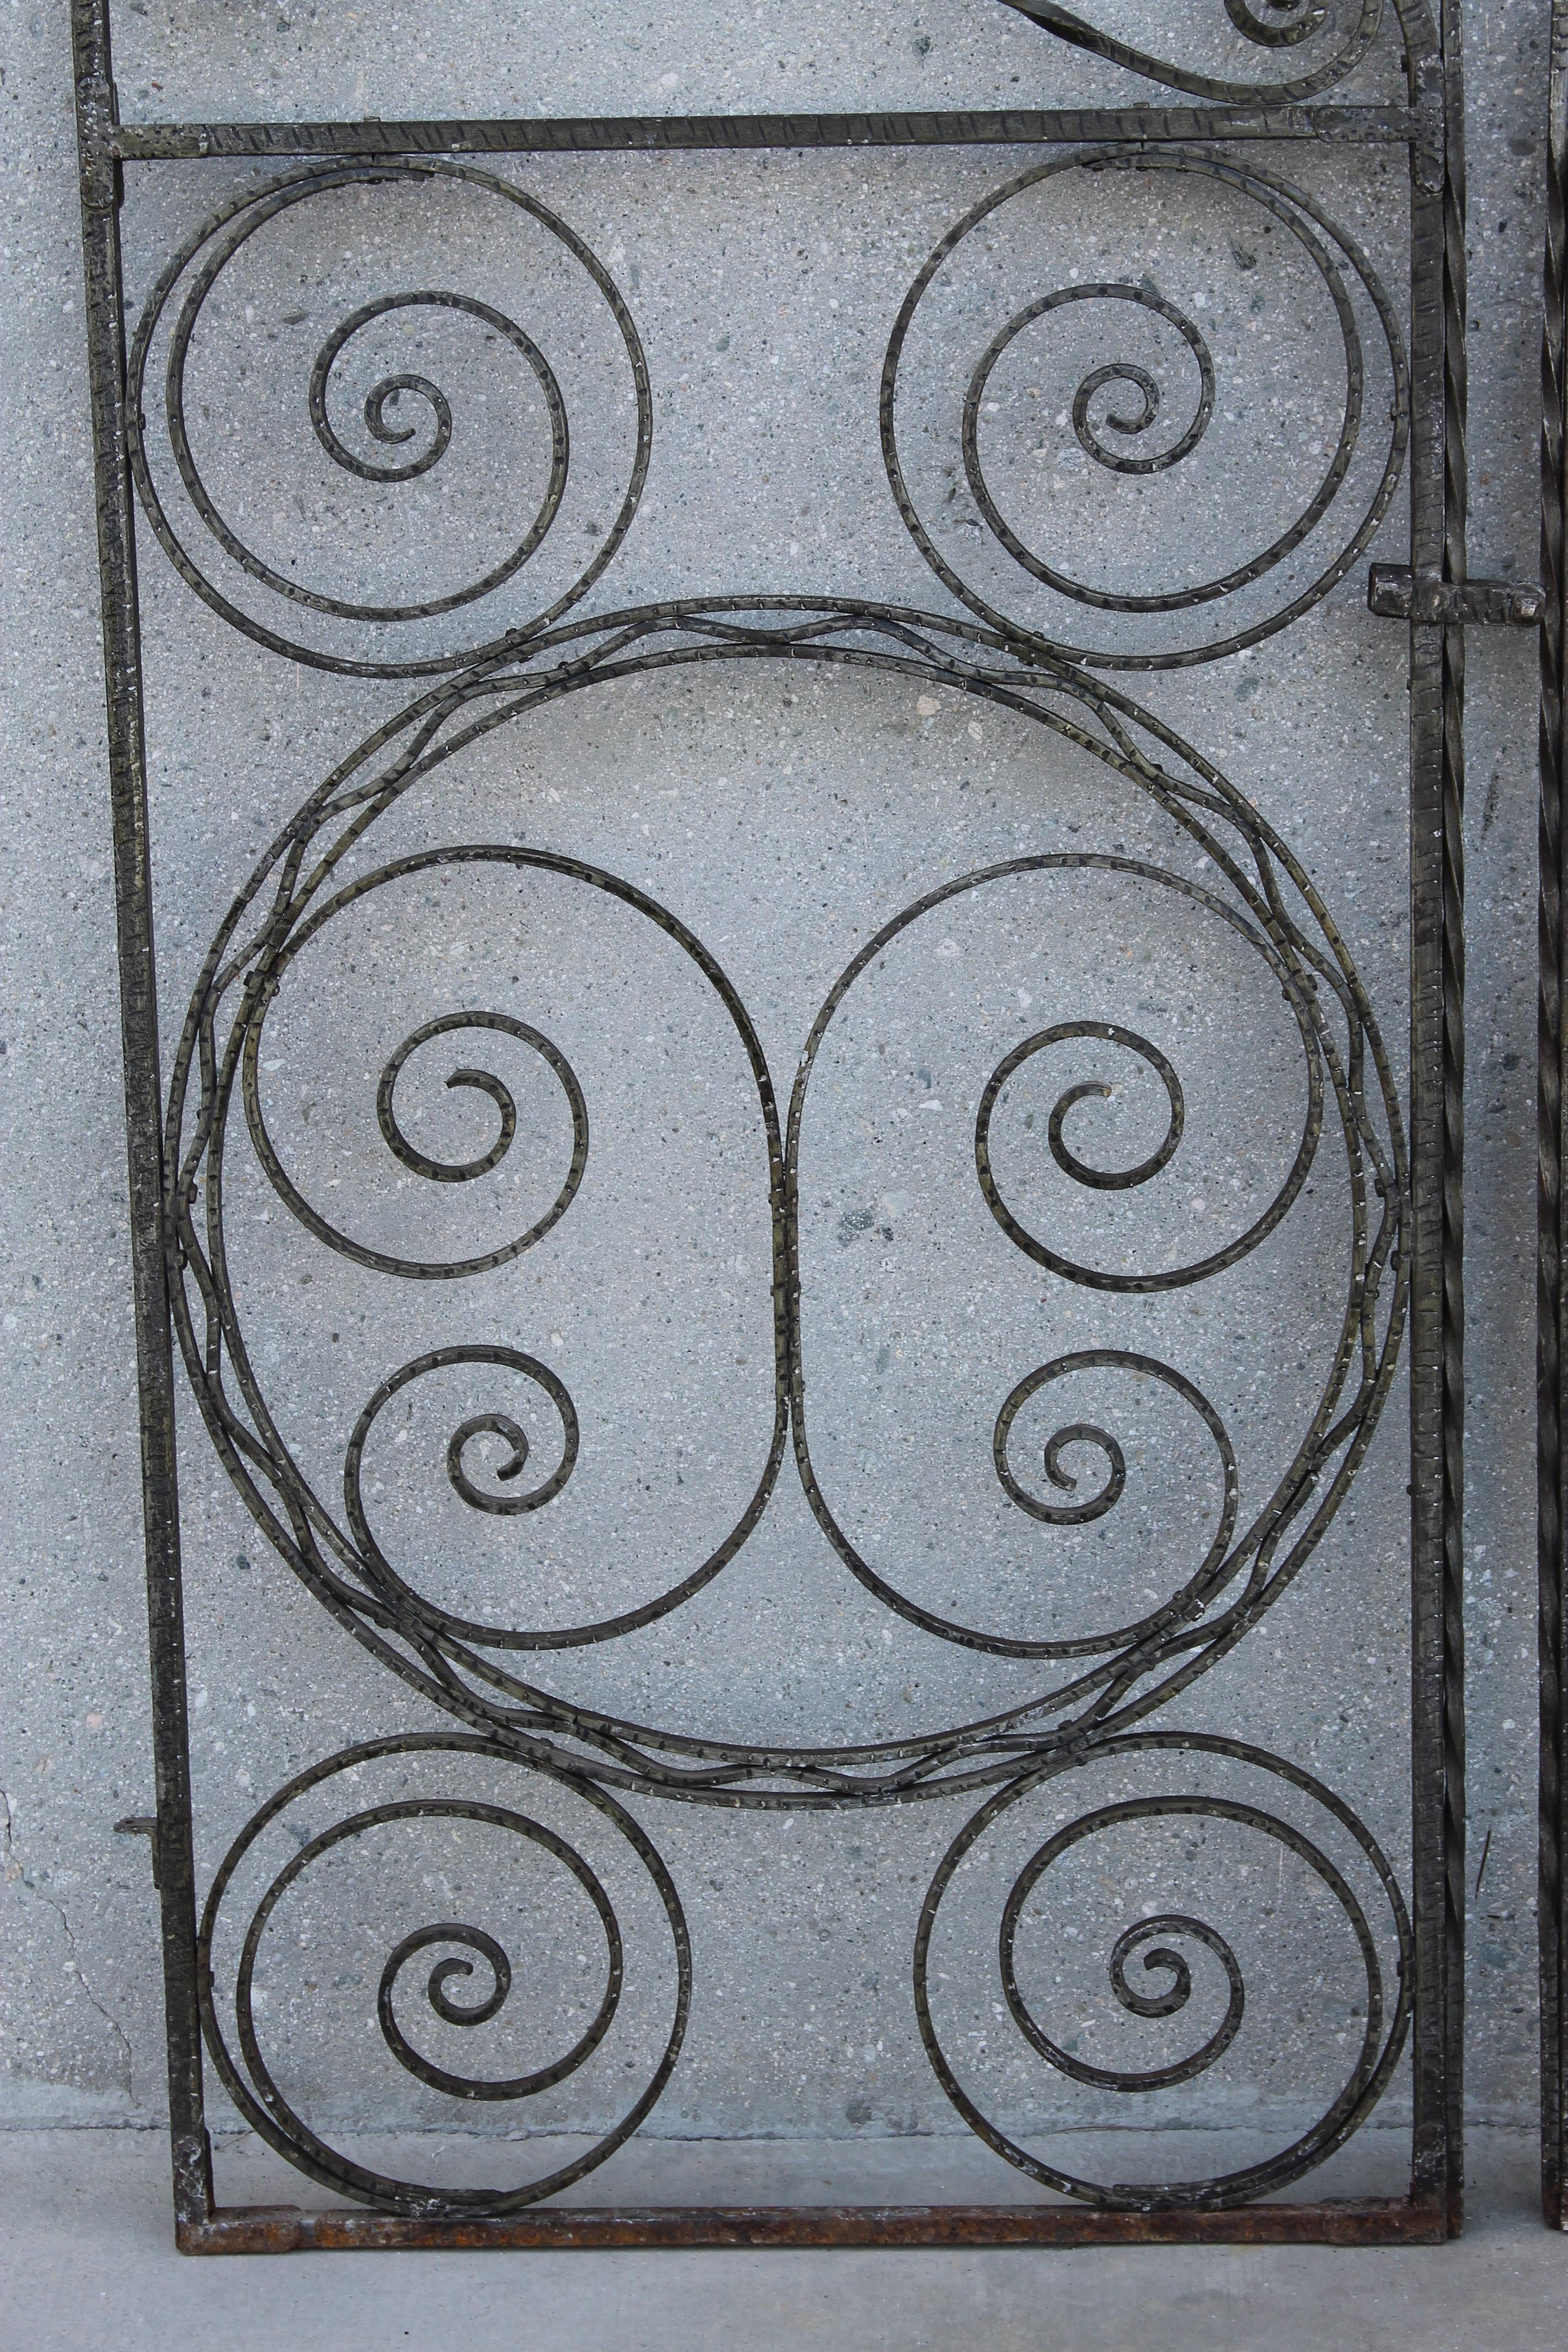 A large pair of Renaissance style forged iron gates with hand hammered and twisted scrolls and circles. Gates are evocative of Erte butterflies of the 1920s. Very detailed craftsmanship. Each panel is 27.5